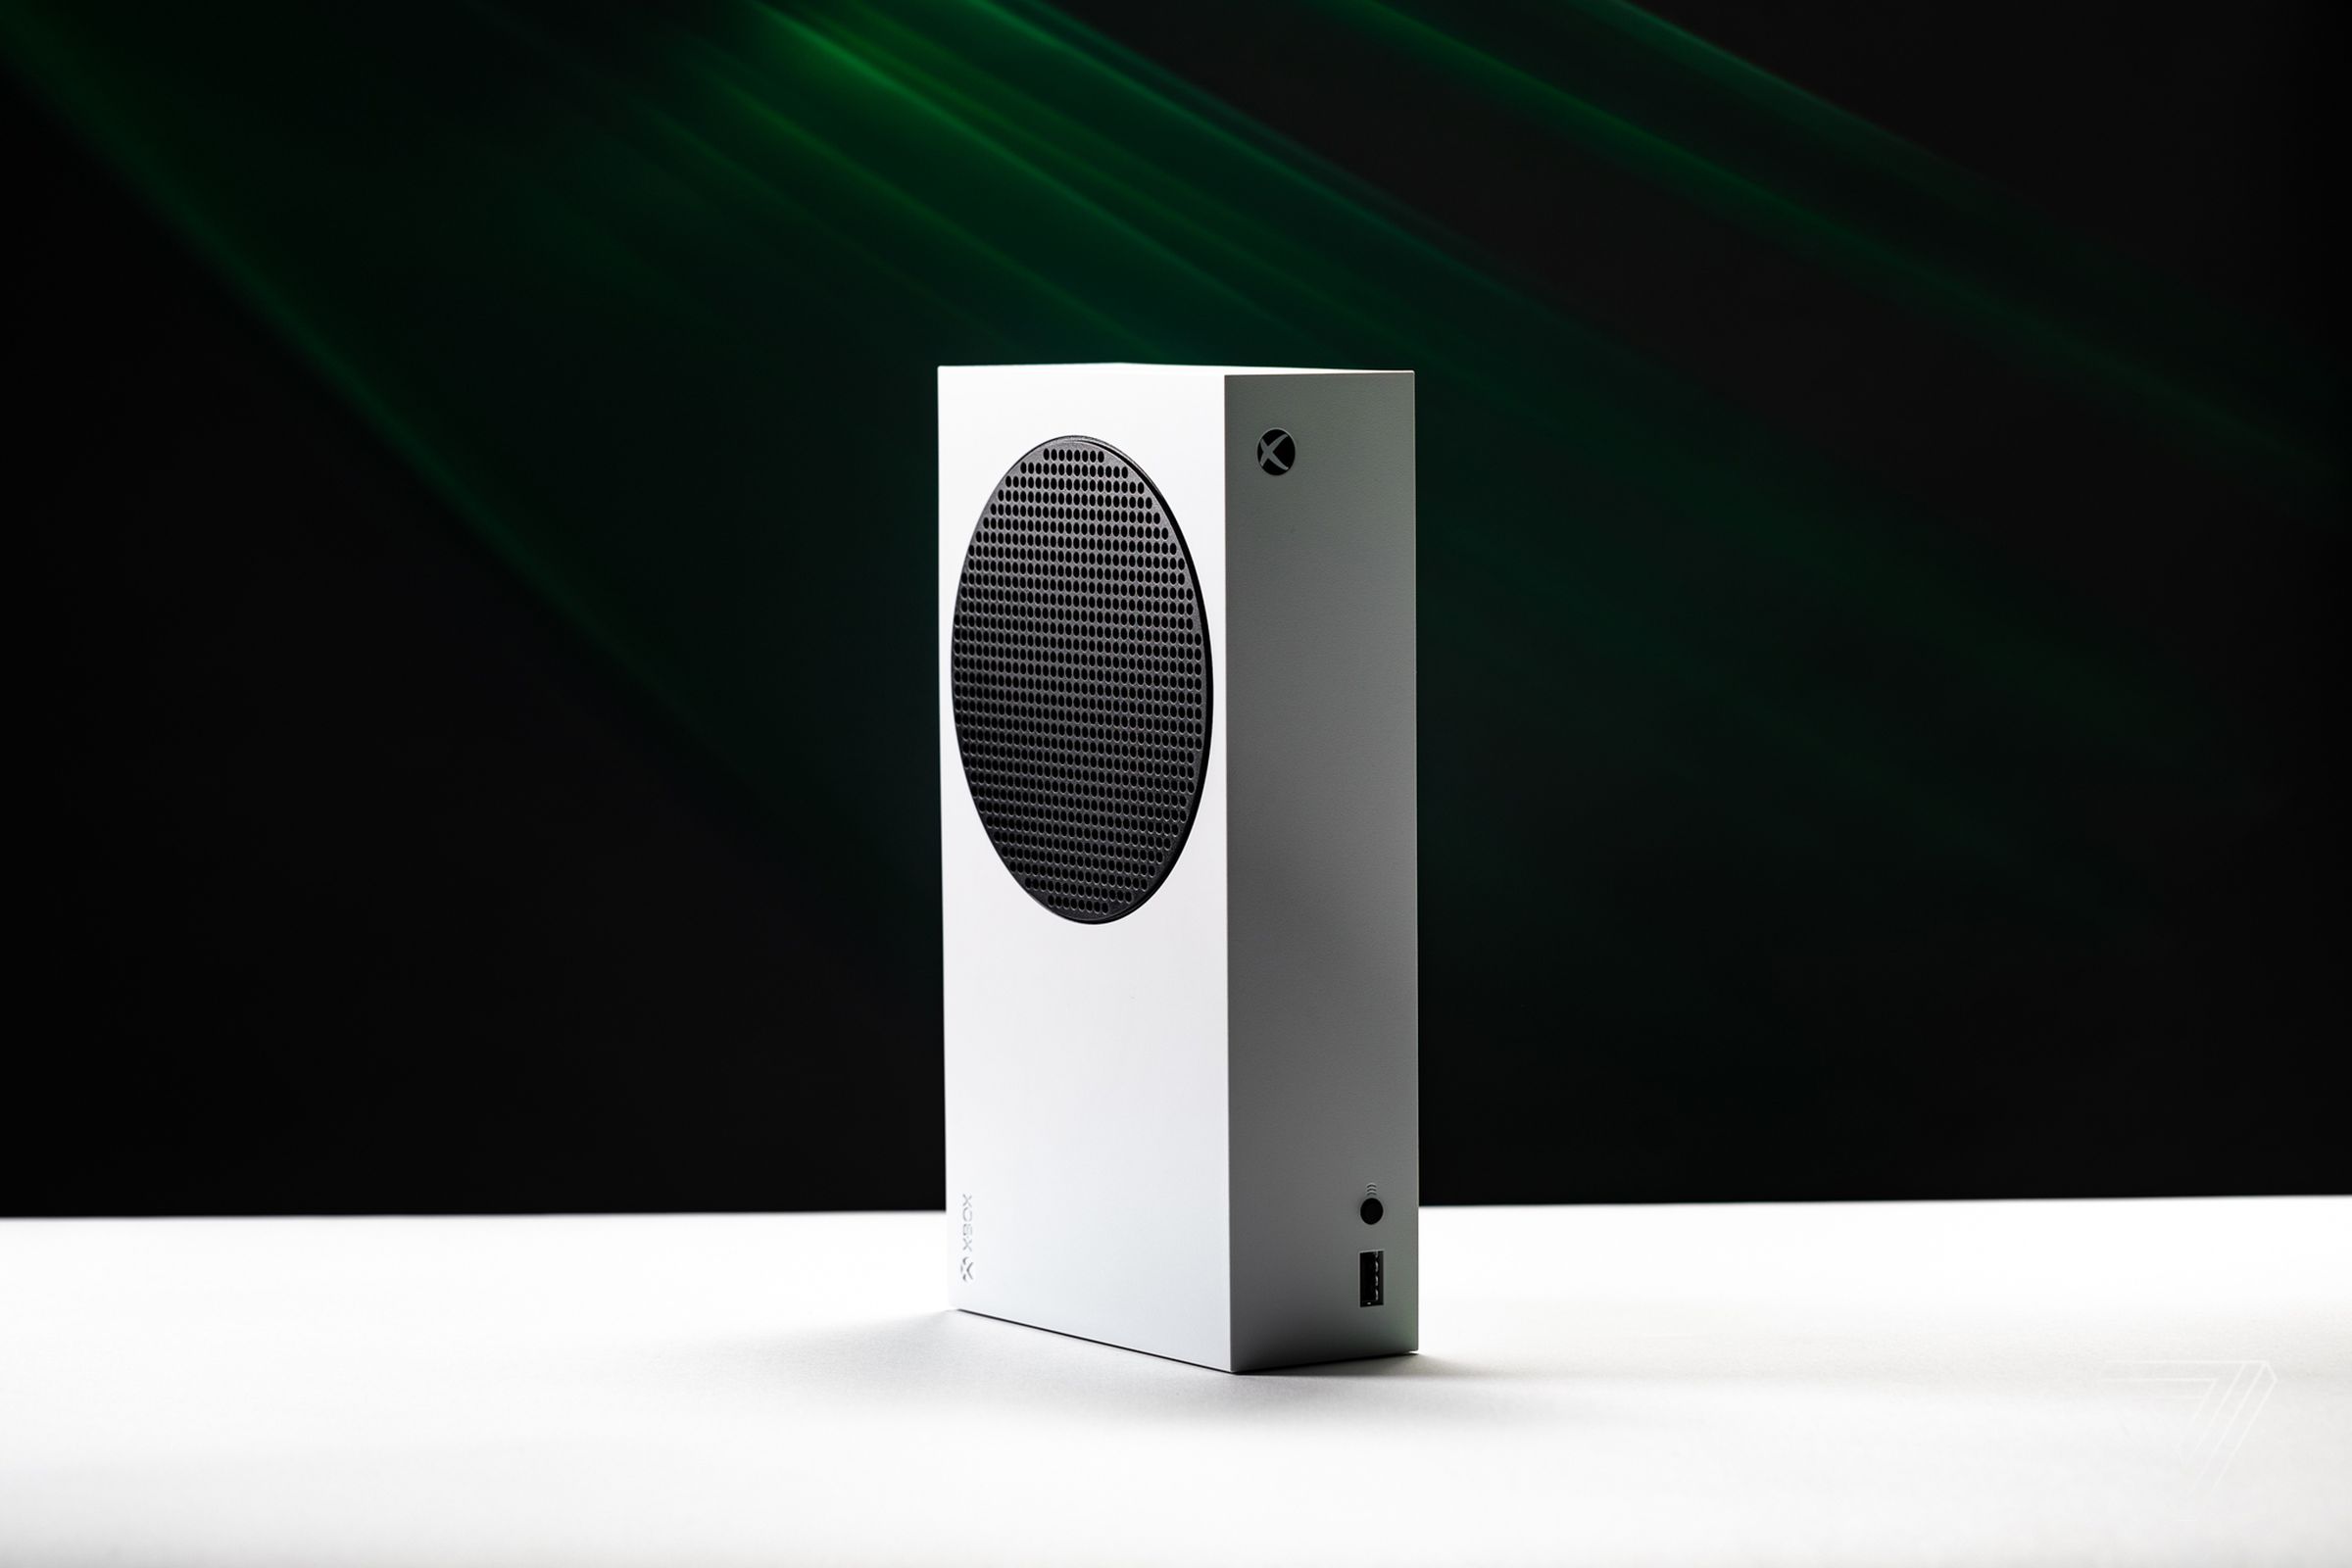 The white and black Xbox Series S console standing vertically on a white table in front of a black background.